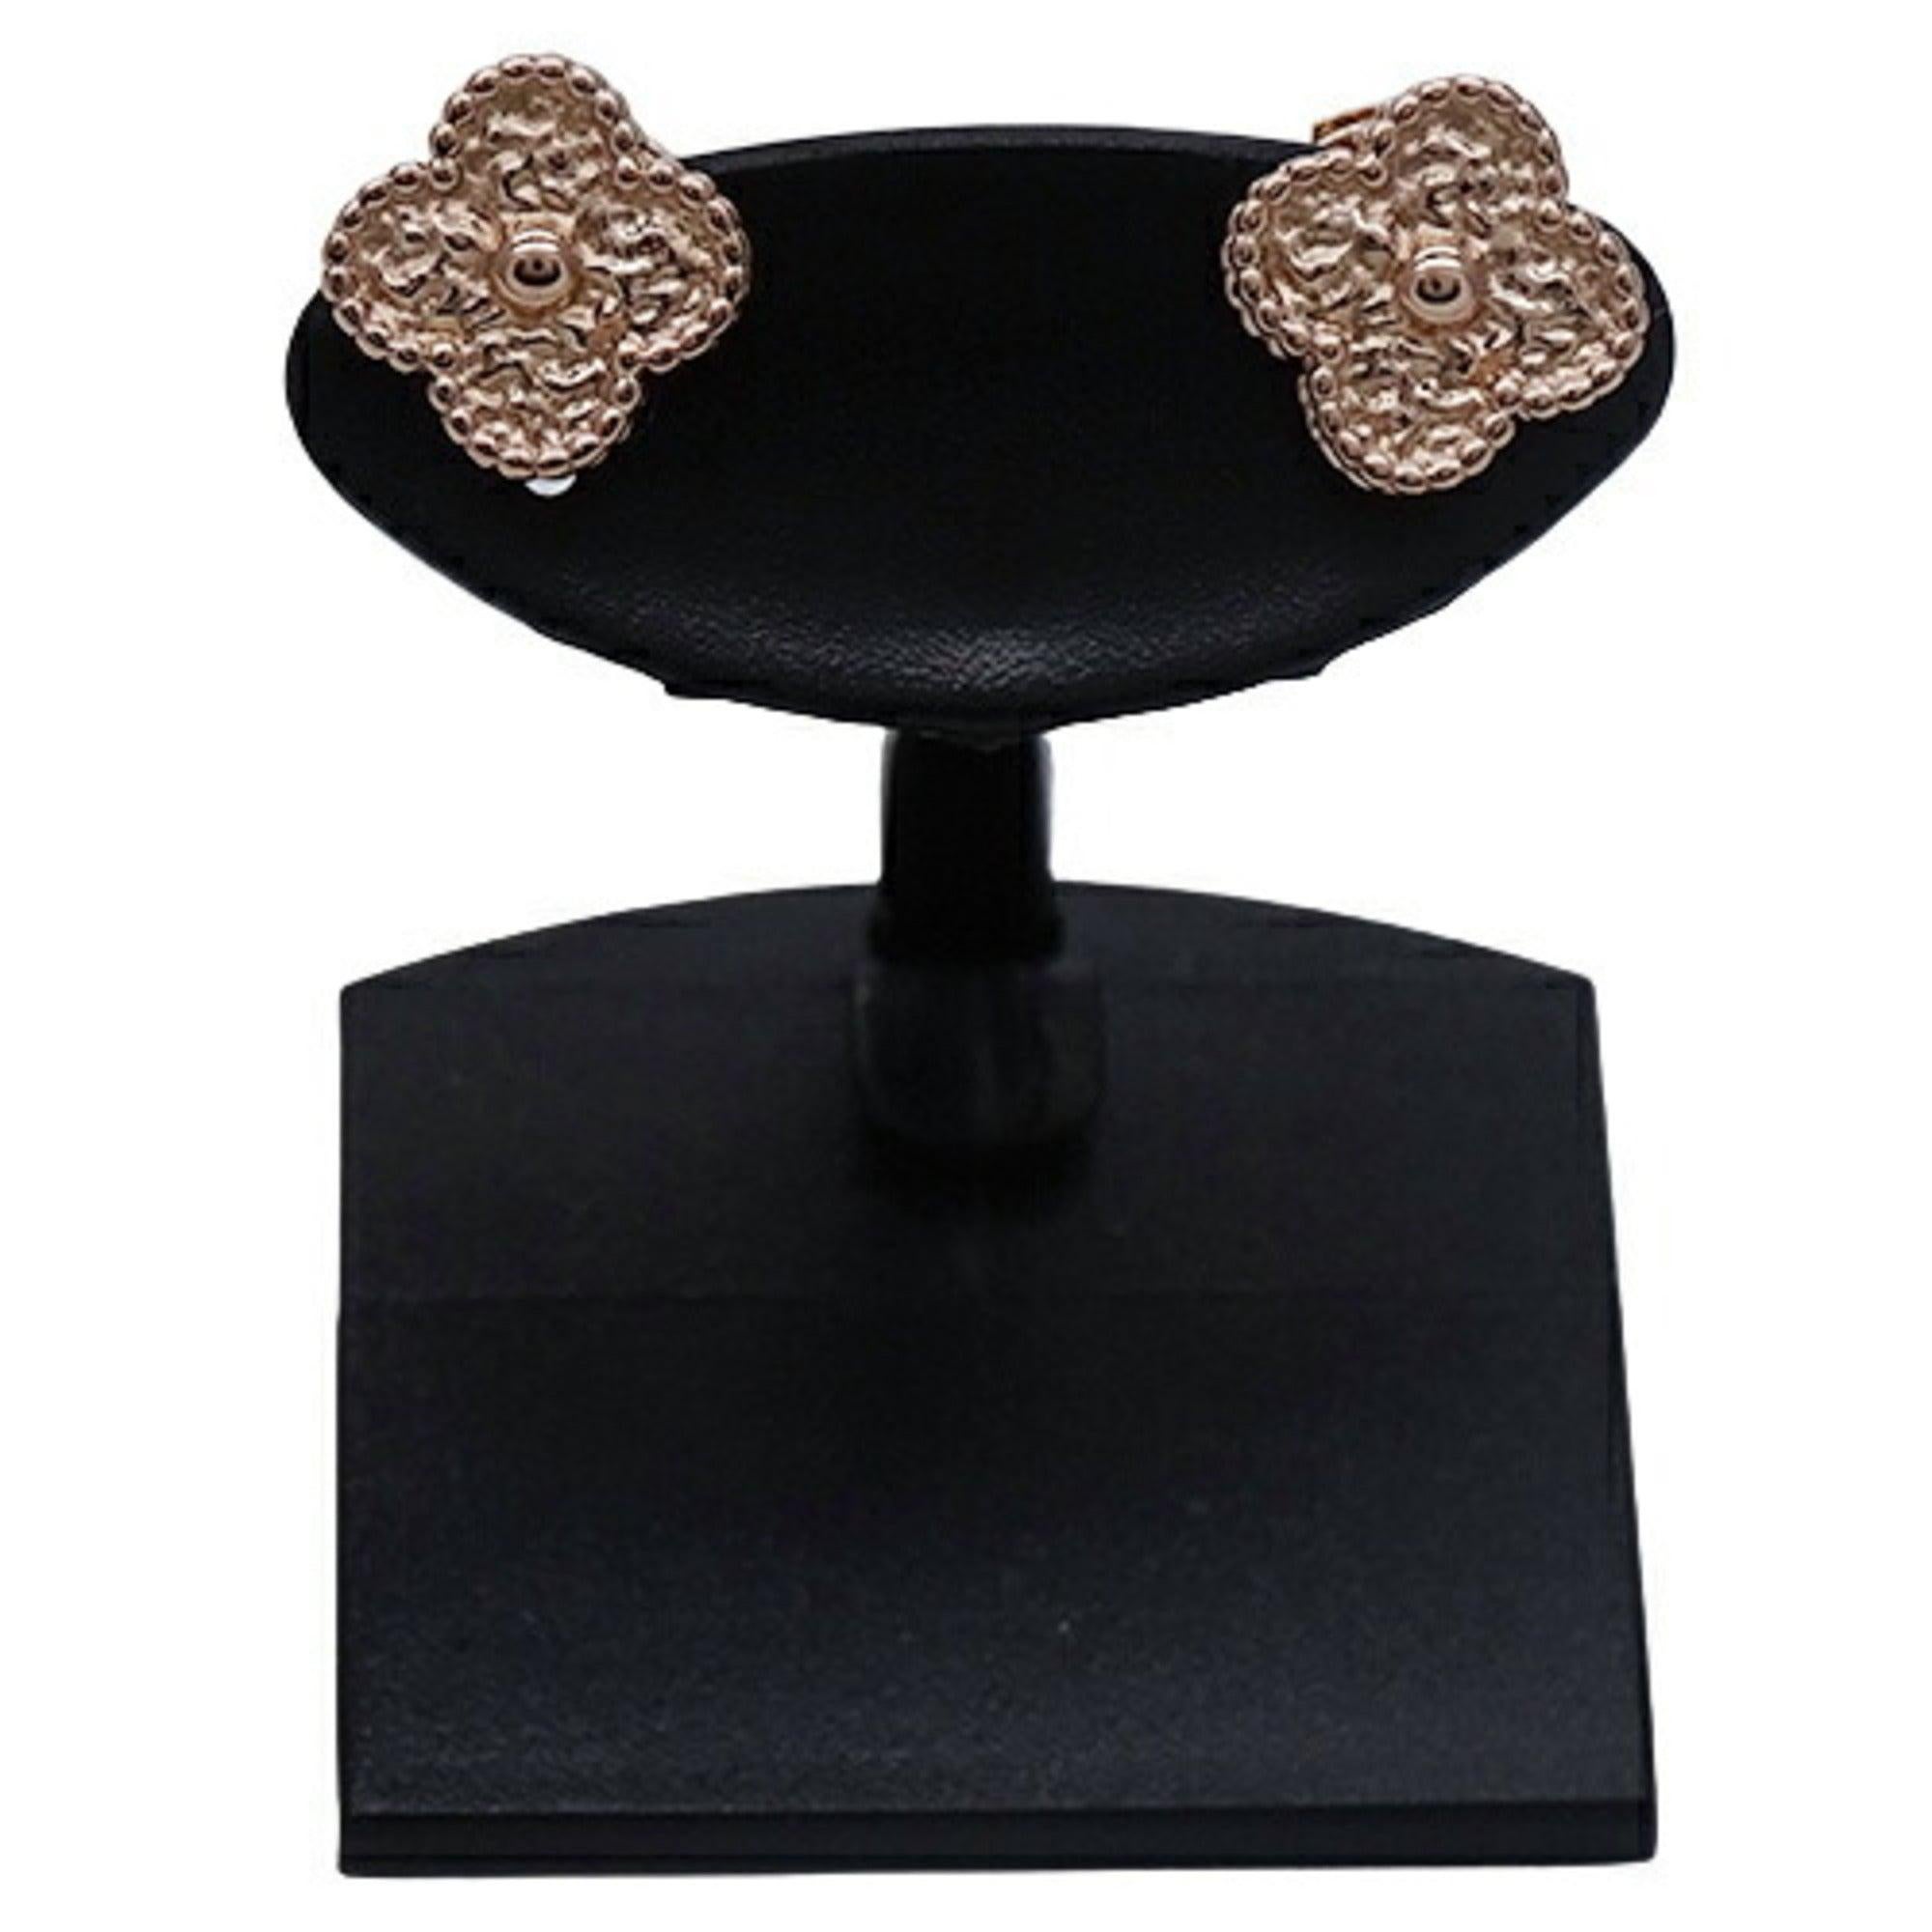 Van Cleef & Arpels Sweet Alhambra Earrings in Pink Gold 

Additional information:
Brand: Van Cleef & Arpels
Gender: Women
Line: Sweet Alhambra
Earring type: Stud earrings
SKU:elaGZyh0b
Condition details: This item has been used and may have some